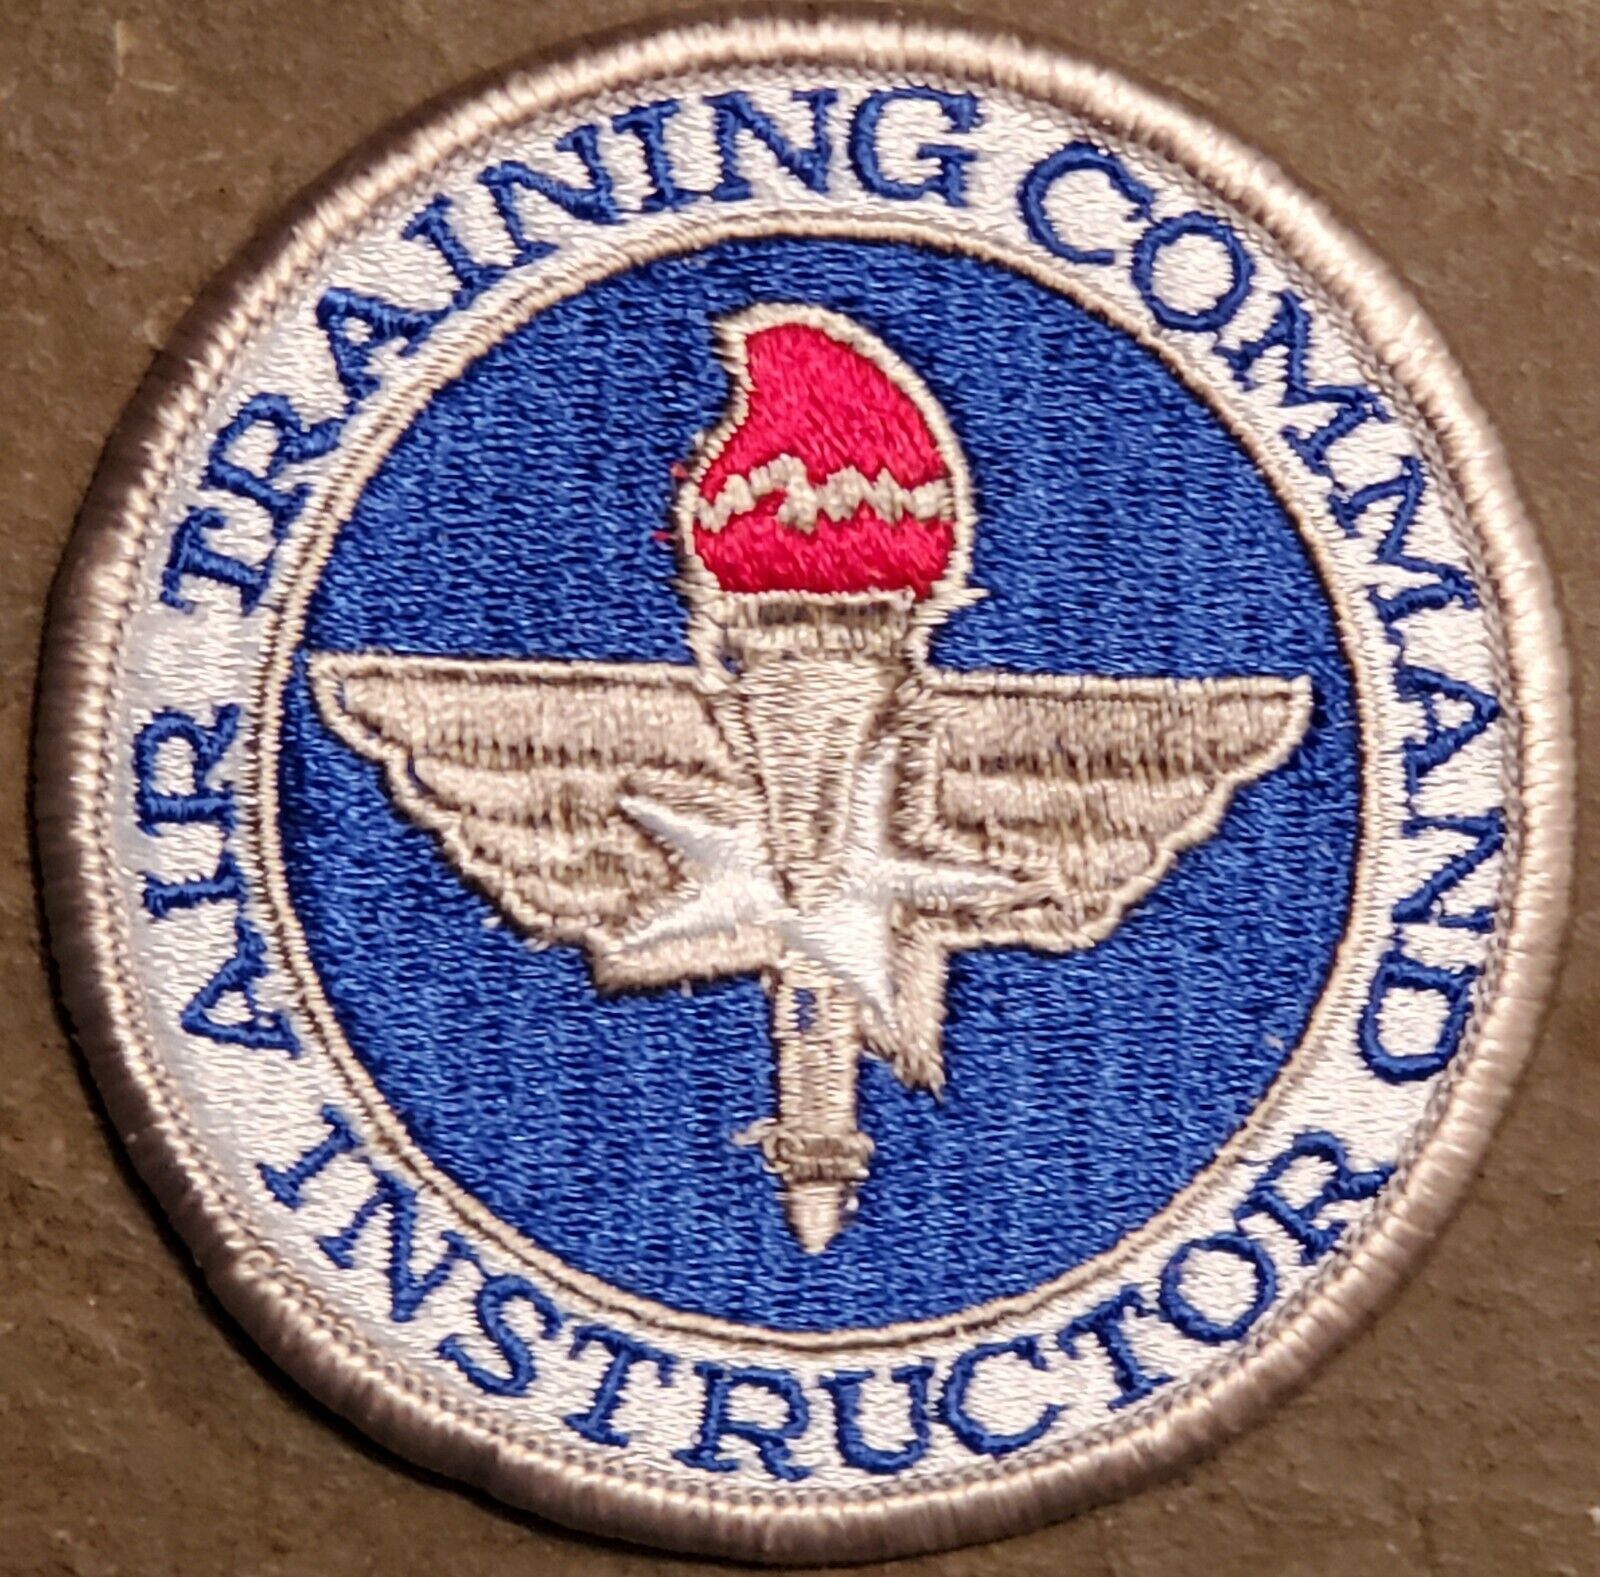 USAF AIR FORCE: AIR EDUCATION AND TRAINING COMMAND INSTRUCTOR PATCH COLOR VTG